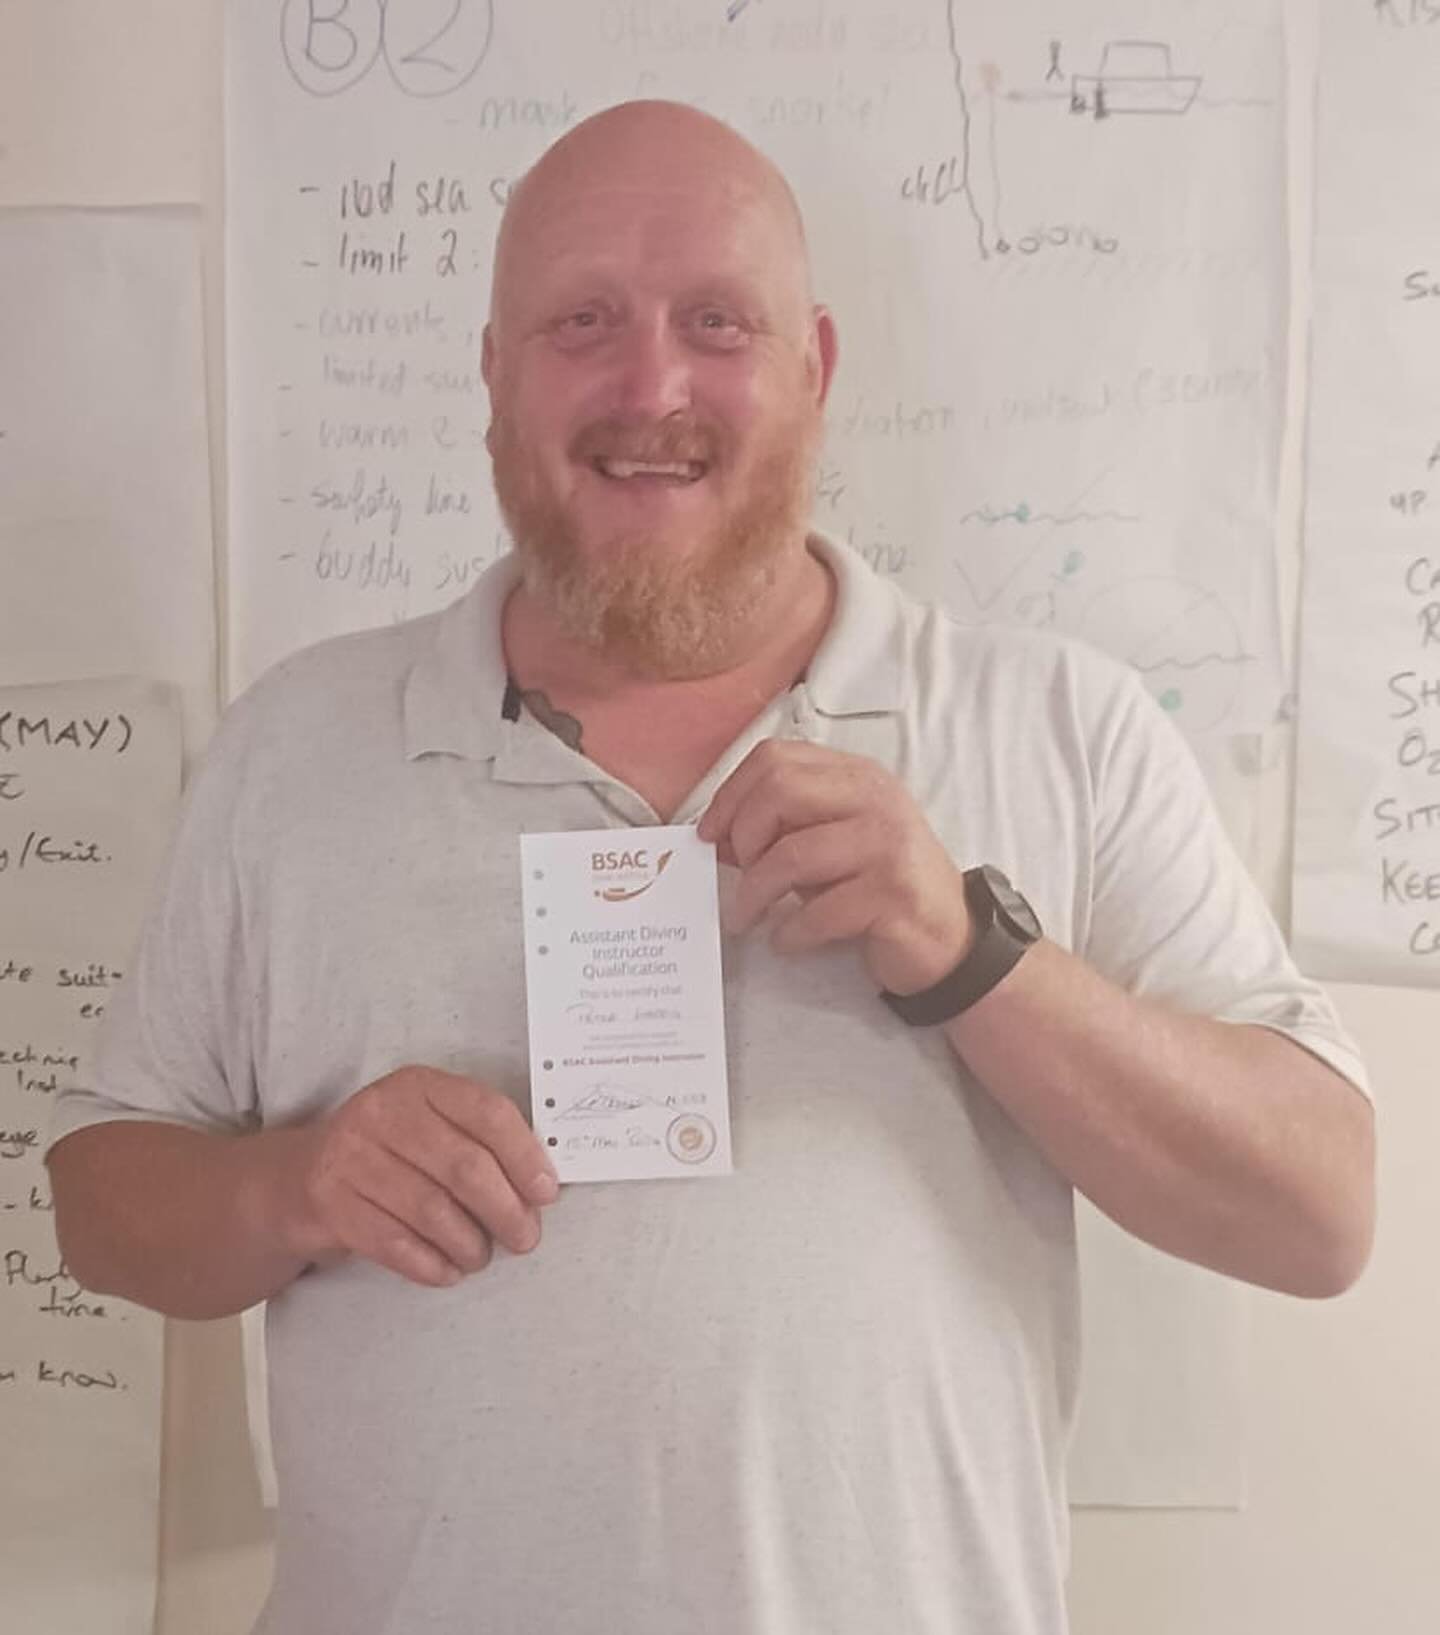 All the congratulations to our Pete on passing his IFC- Instructor Foundation Course.

Pete is an absolute asset to our club- nurturing our newer divers with buoyancy practice and skills, as well as being the diver who is always in the water encourag